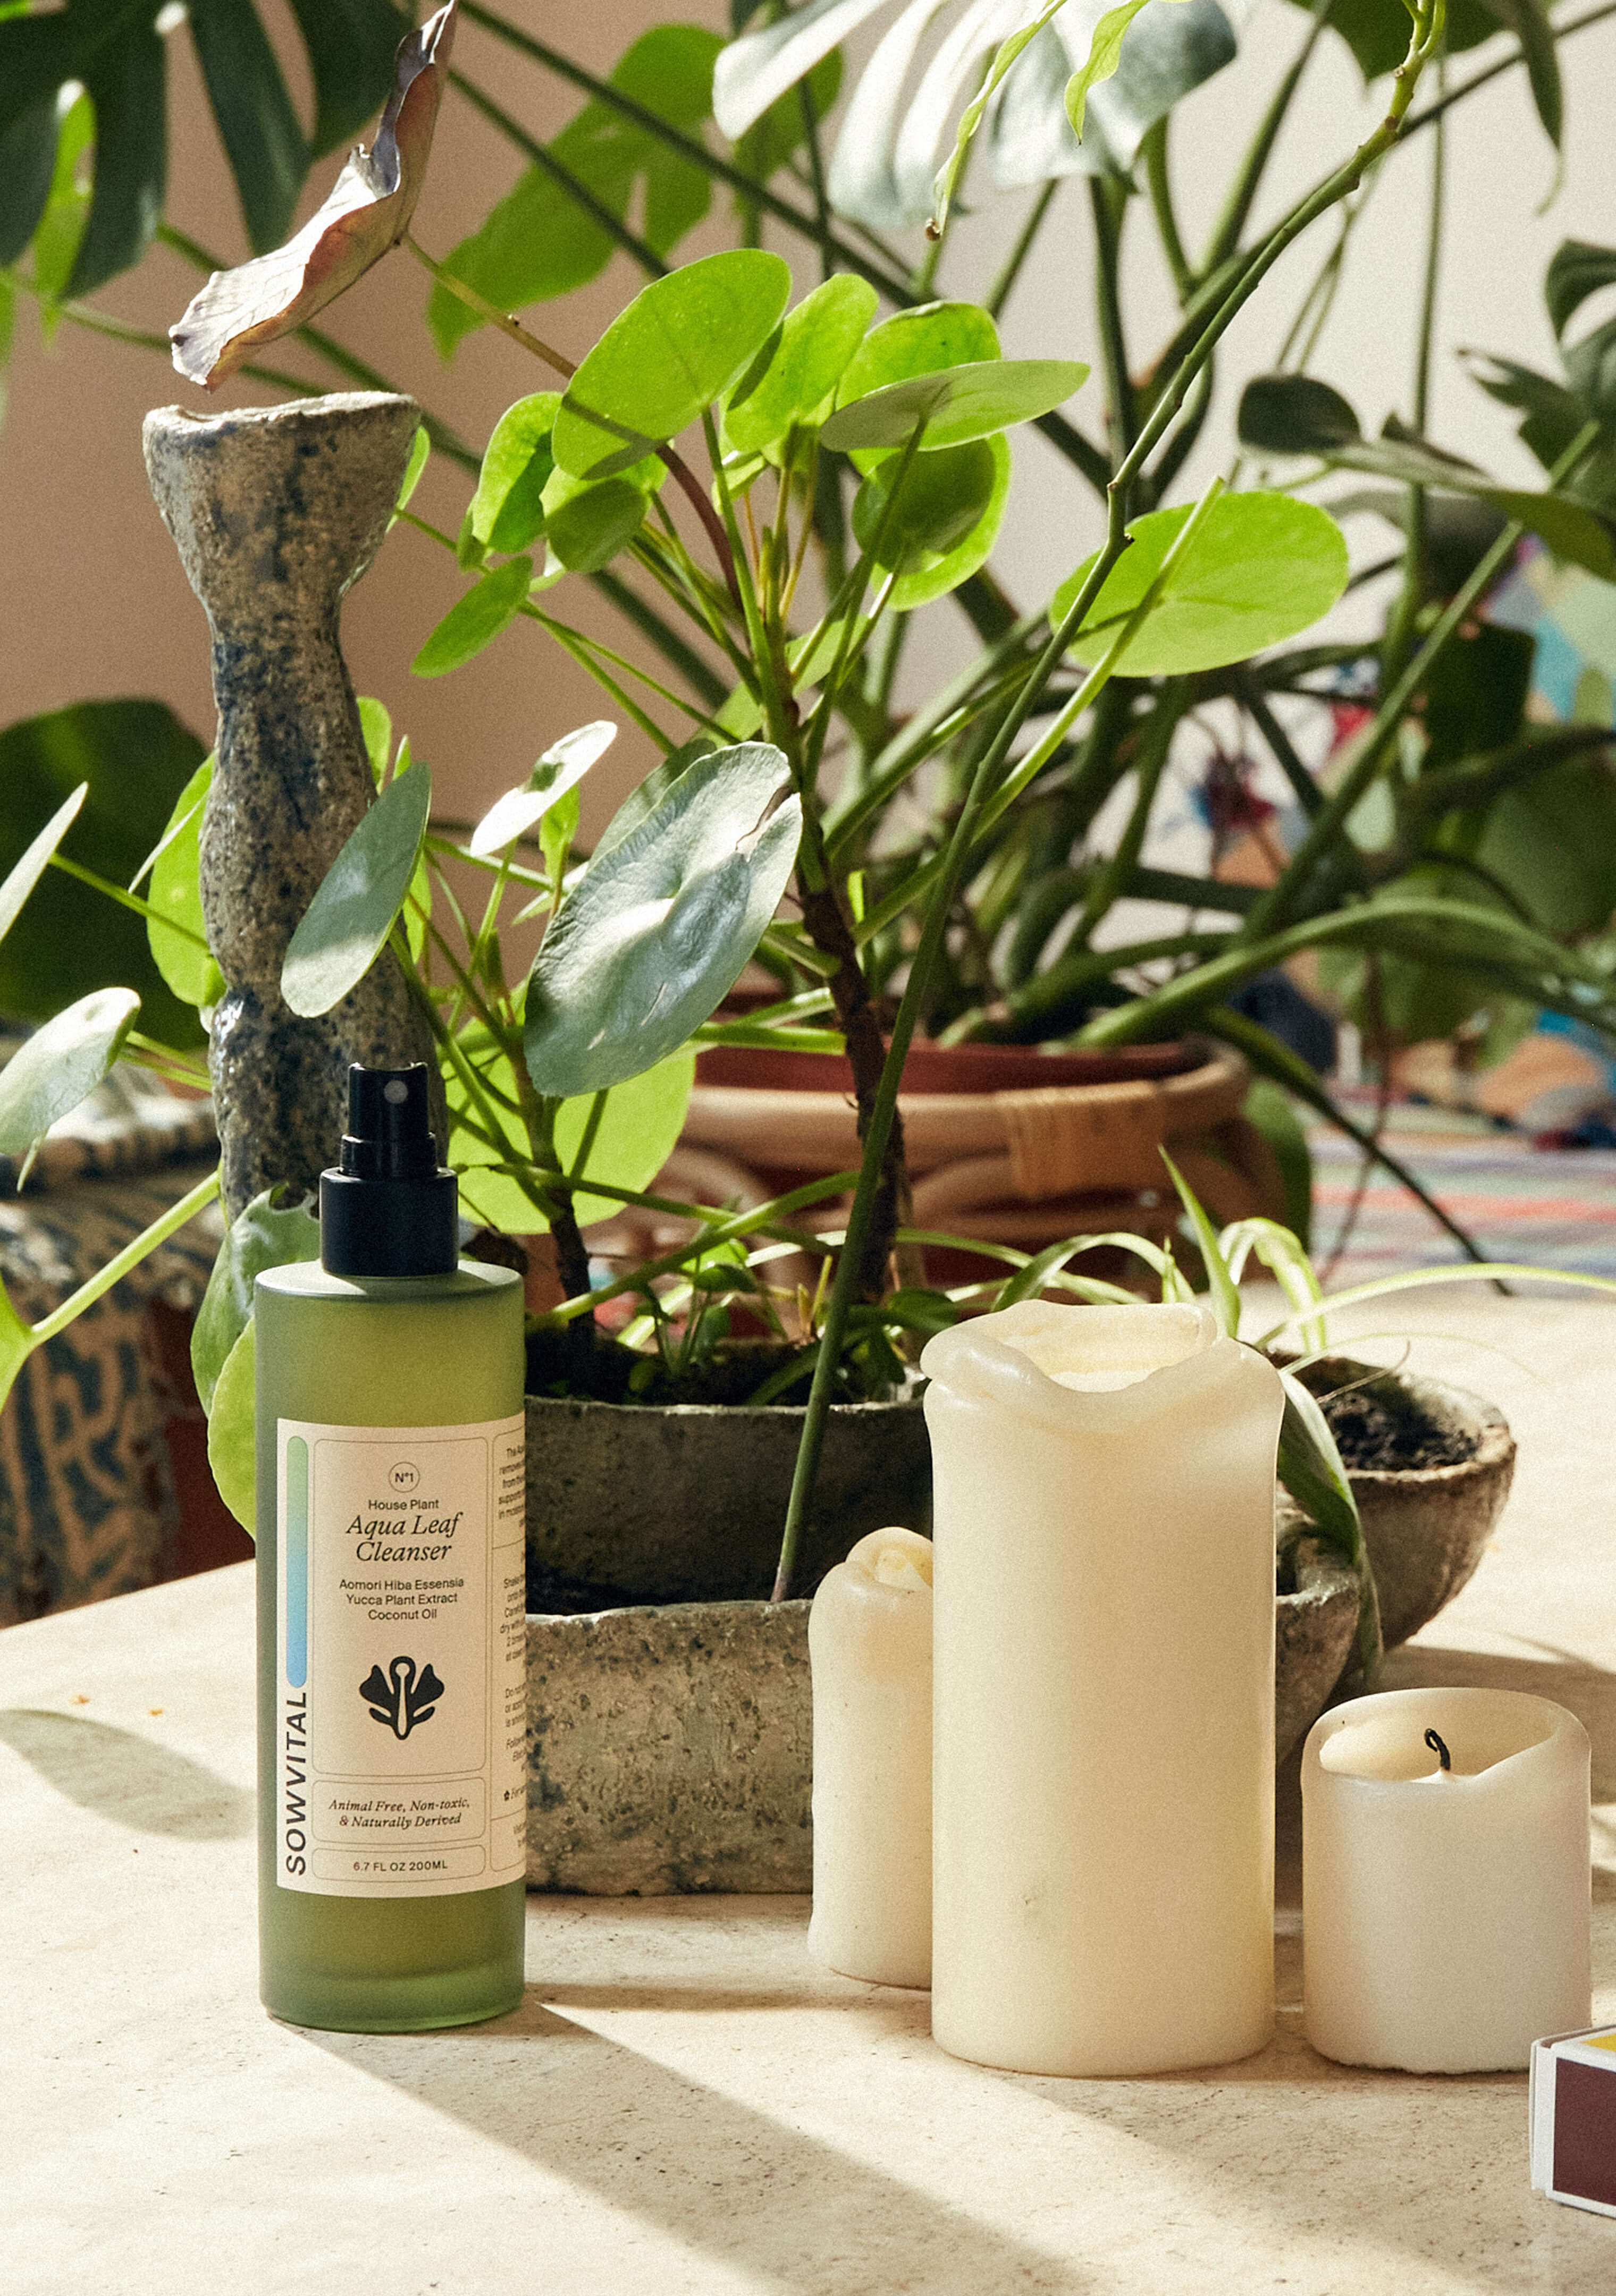 Sowvital aqua leaf cleanser sitting on the table surrounded by 3 candles and a potted Chinese money tree in a room.